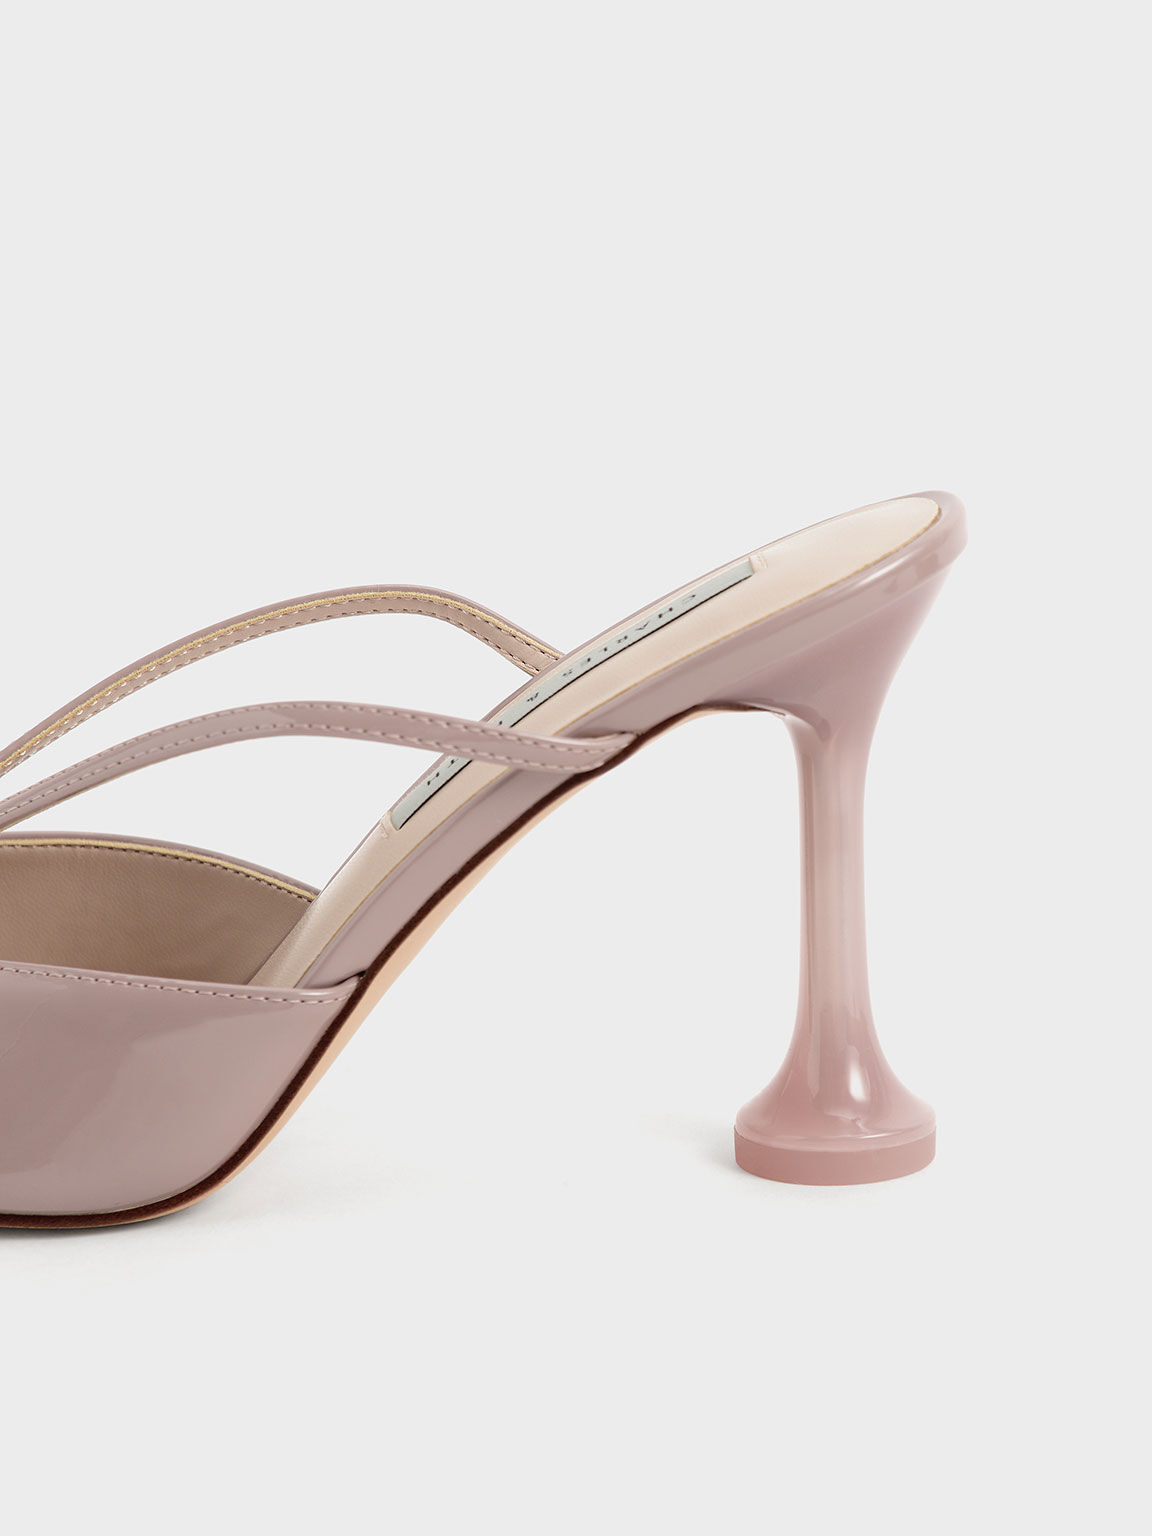 Patent Strappy Sculptural Heel Mules, Taupe, hi-res